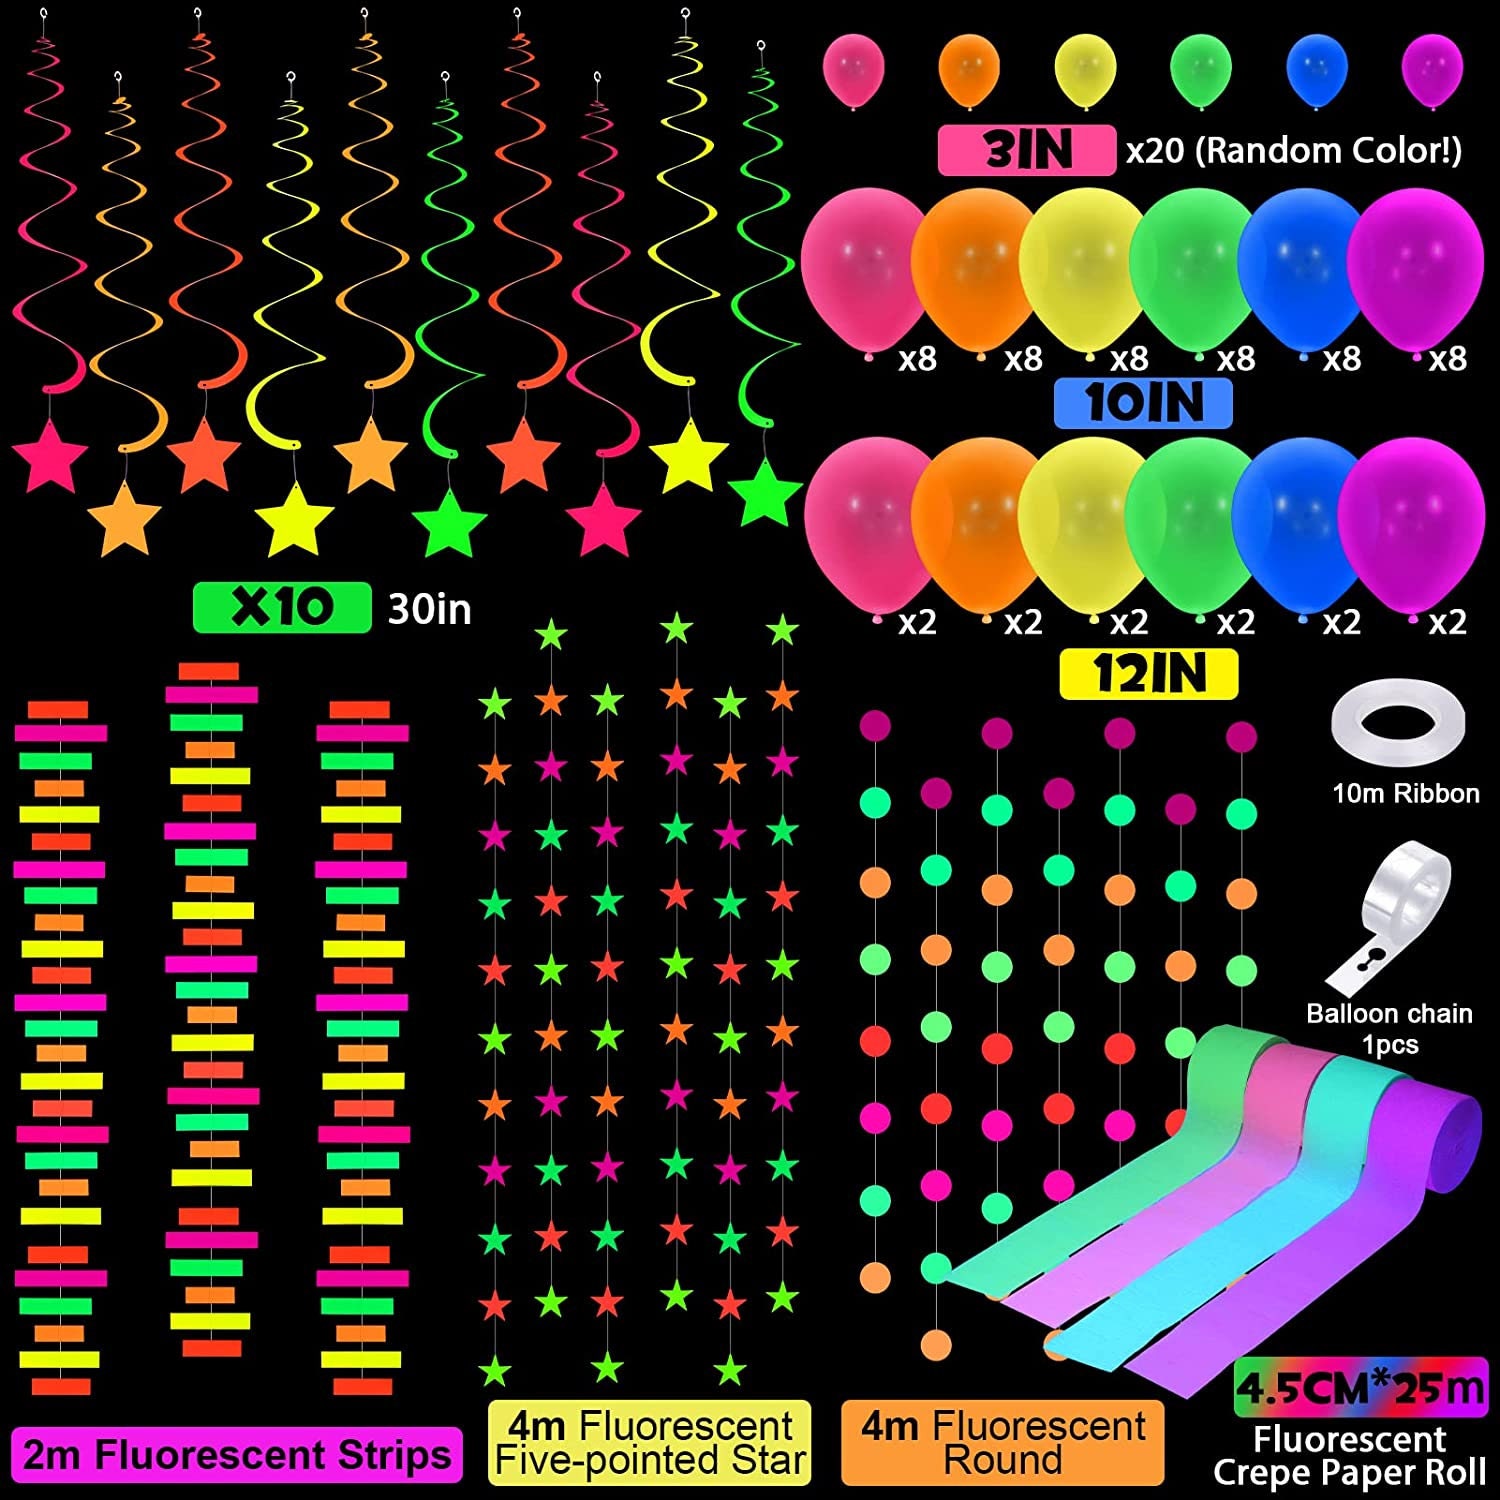 Glow Party-Glow in The Dark Party Sleepover Kit- Neon Party Supplies